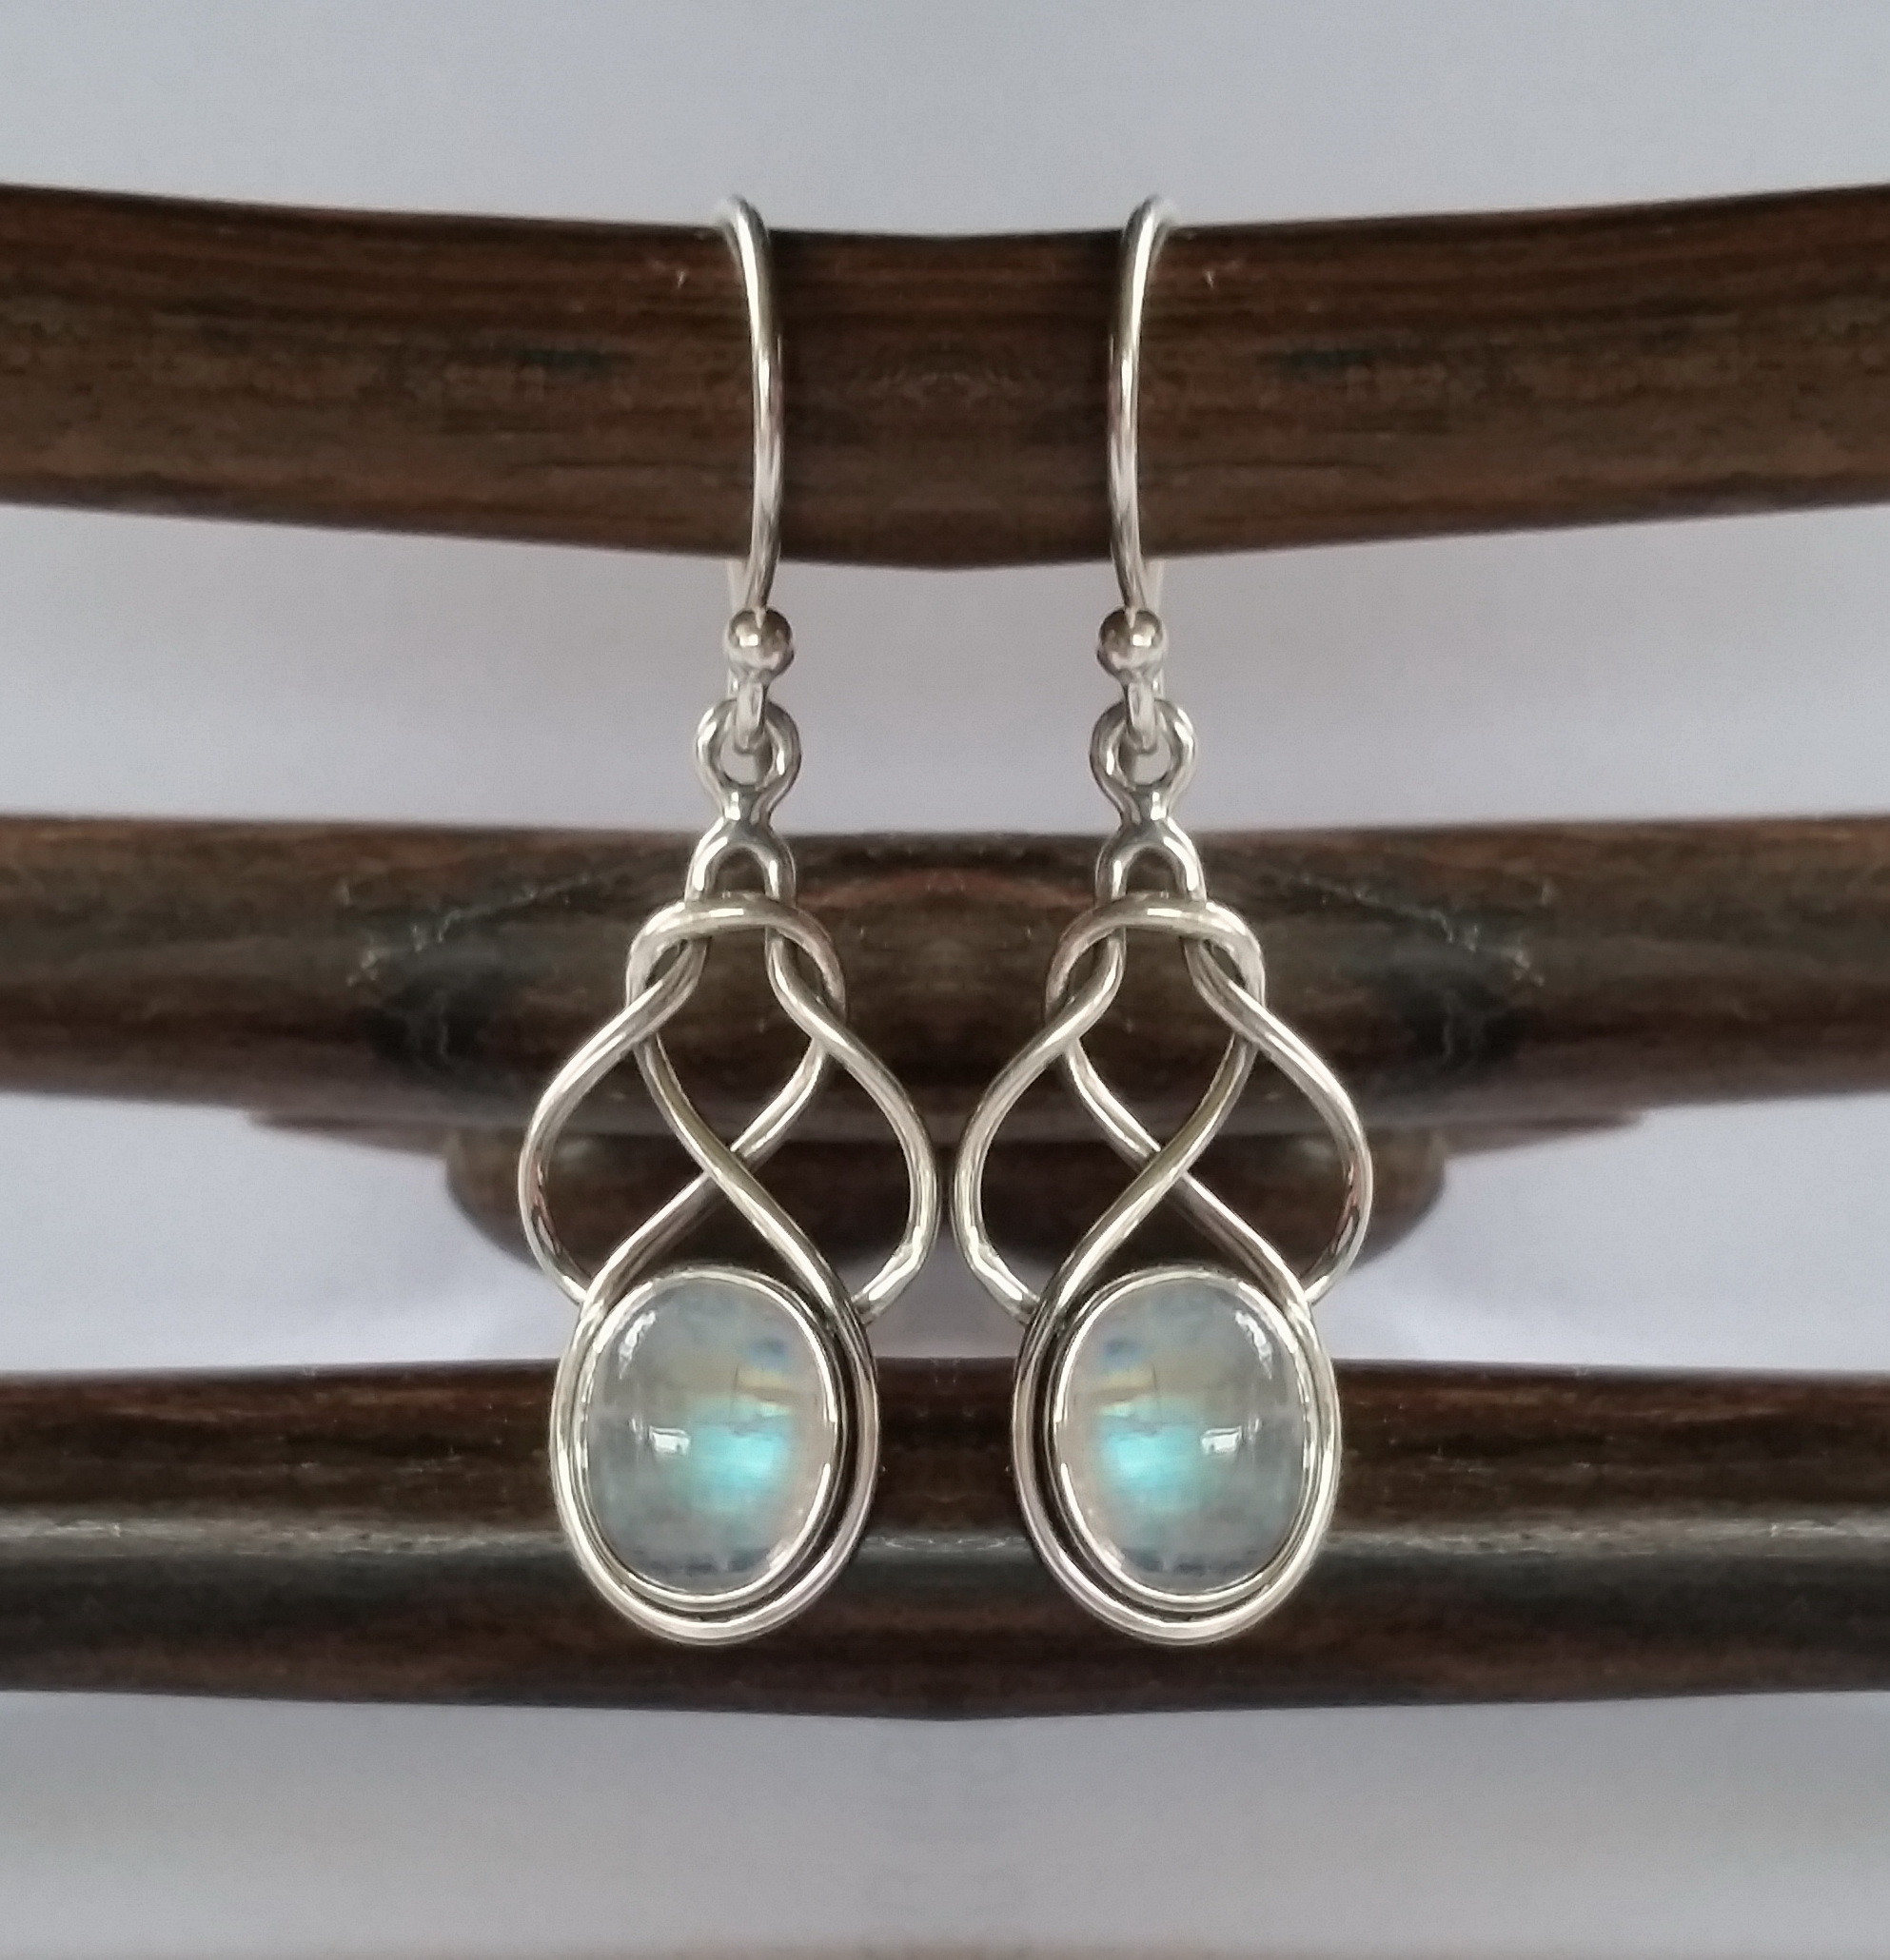 Sterling silver knot style earring with 7 x 9 mm gemstone.